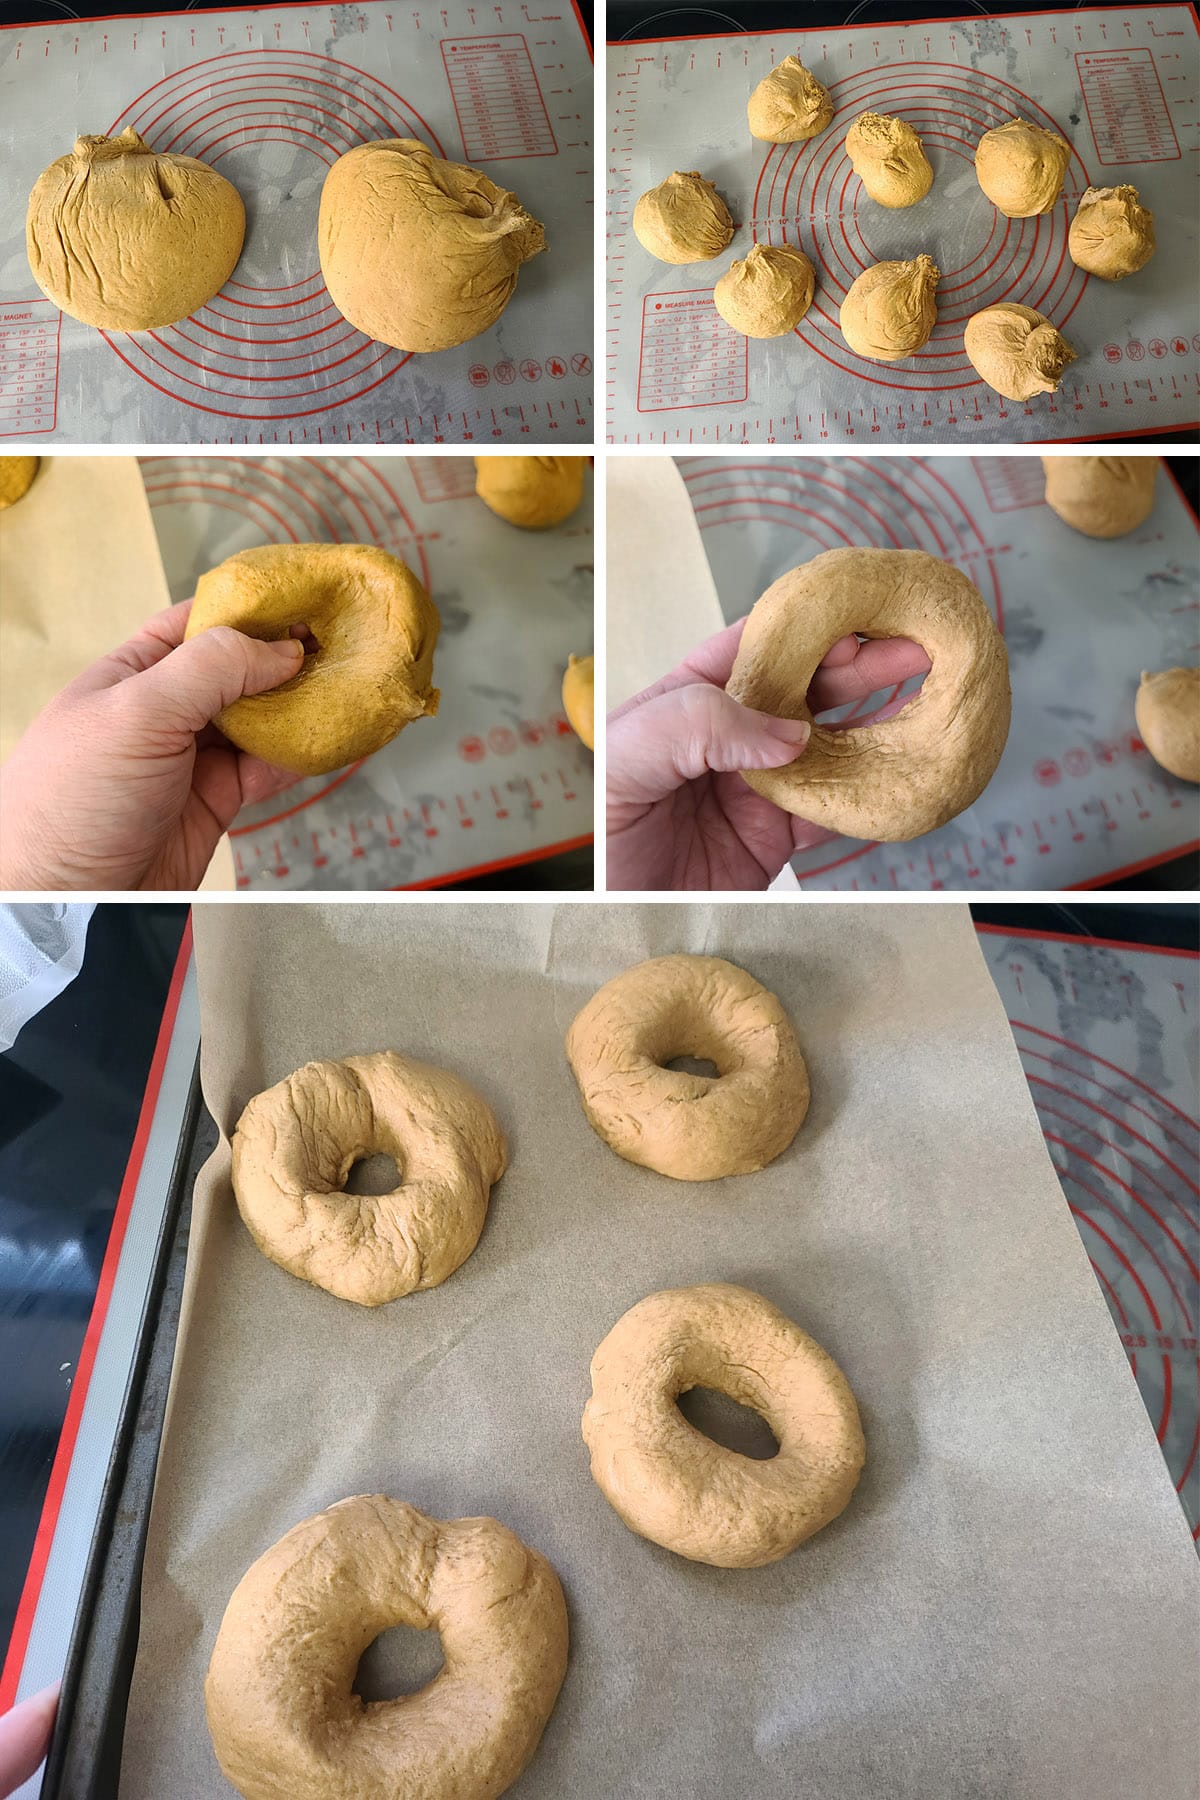 A 5 part image showing the gingerbread dough being divided into 8 pieces, then formed into bagels.